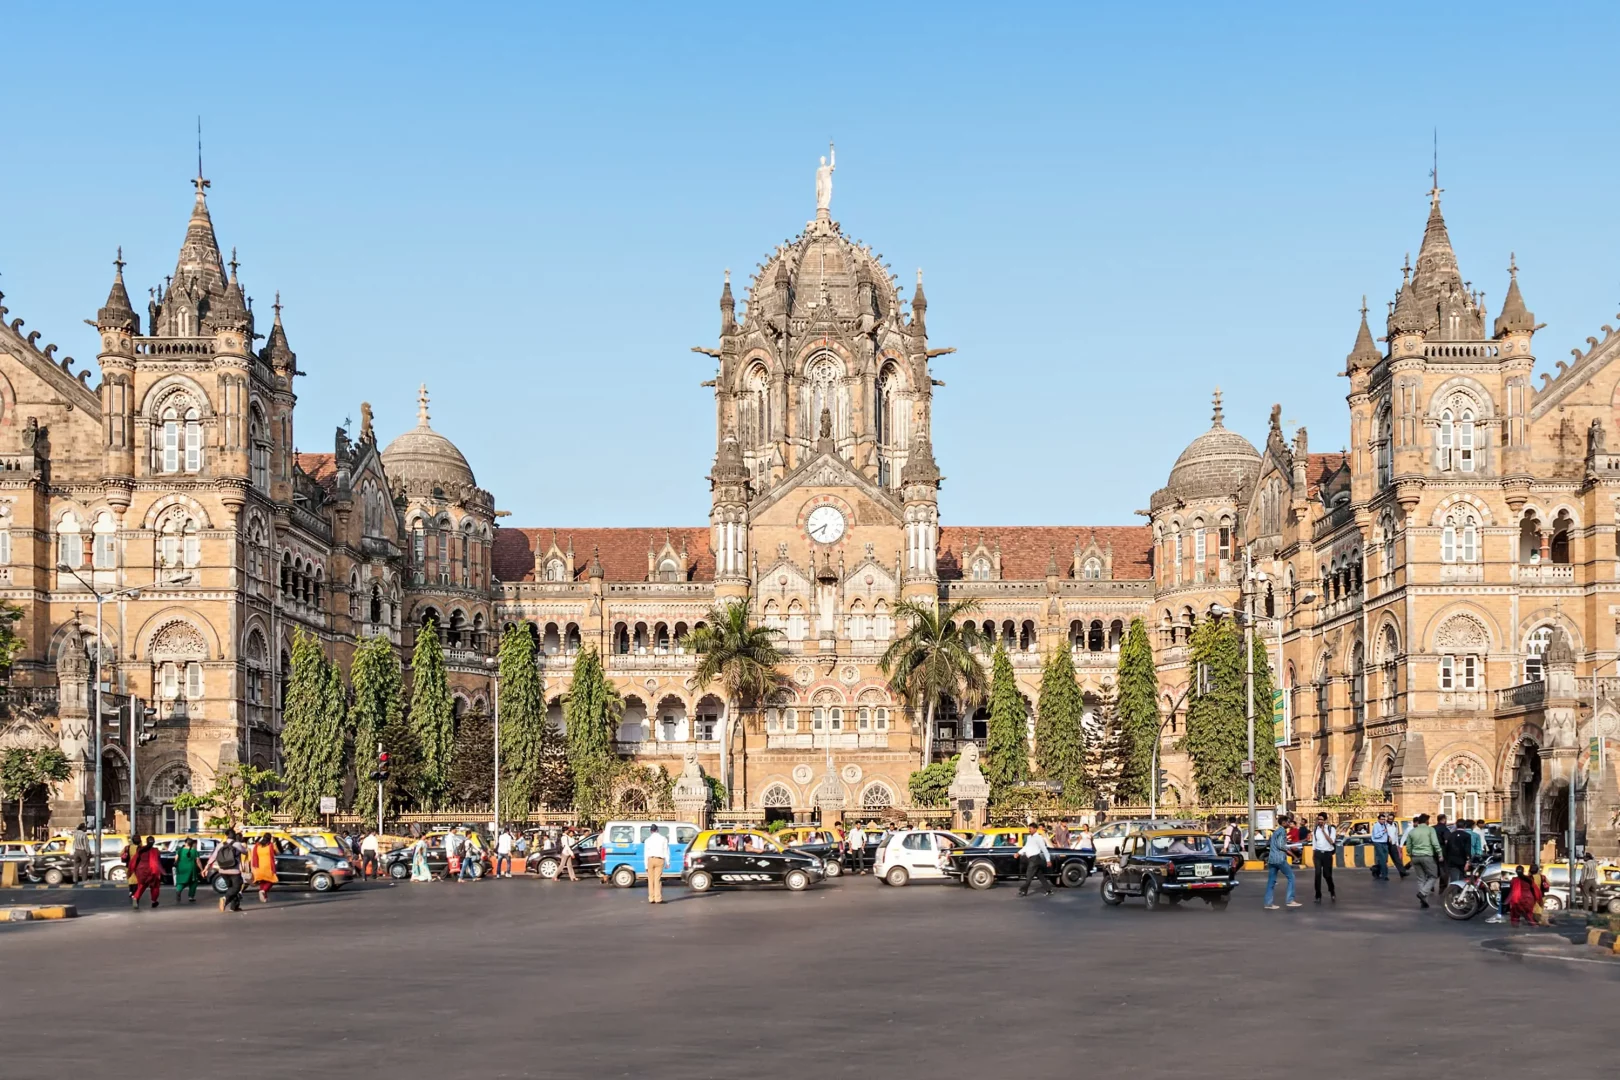 Formerly known as Victoria Terminus, this Gothic Revival masterpiece in Mumbai is an architectural gem. Its ornate façade, pointed arches, and intricate detailing make it a prime example of British colonial architecture in India. The station is not only a transportation hub but also a symbol of Mumbai's rich history.